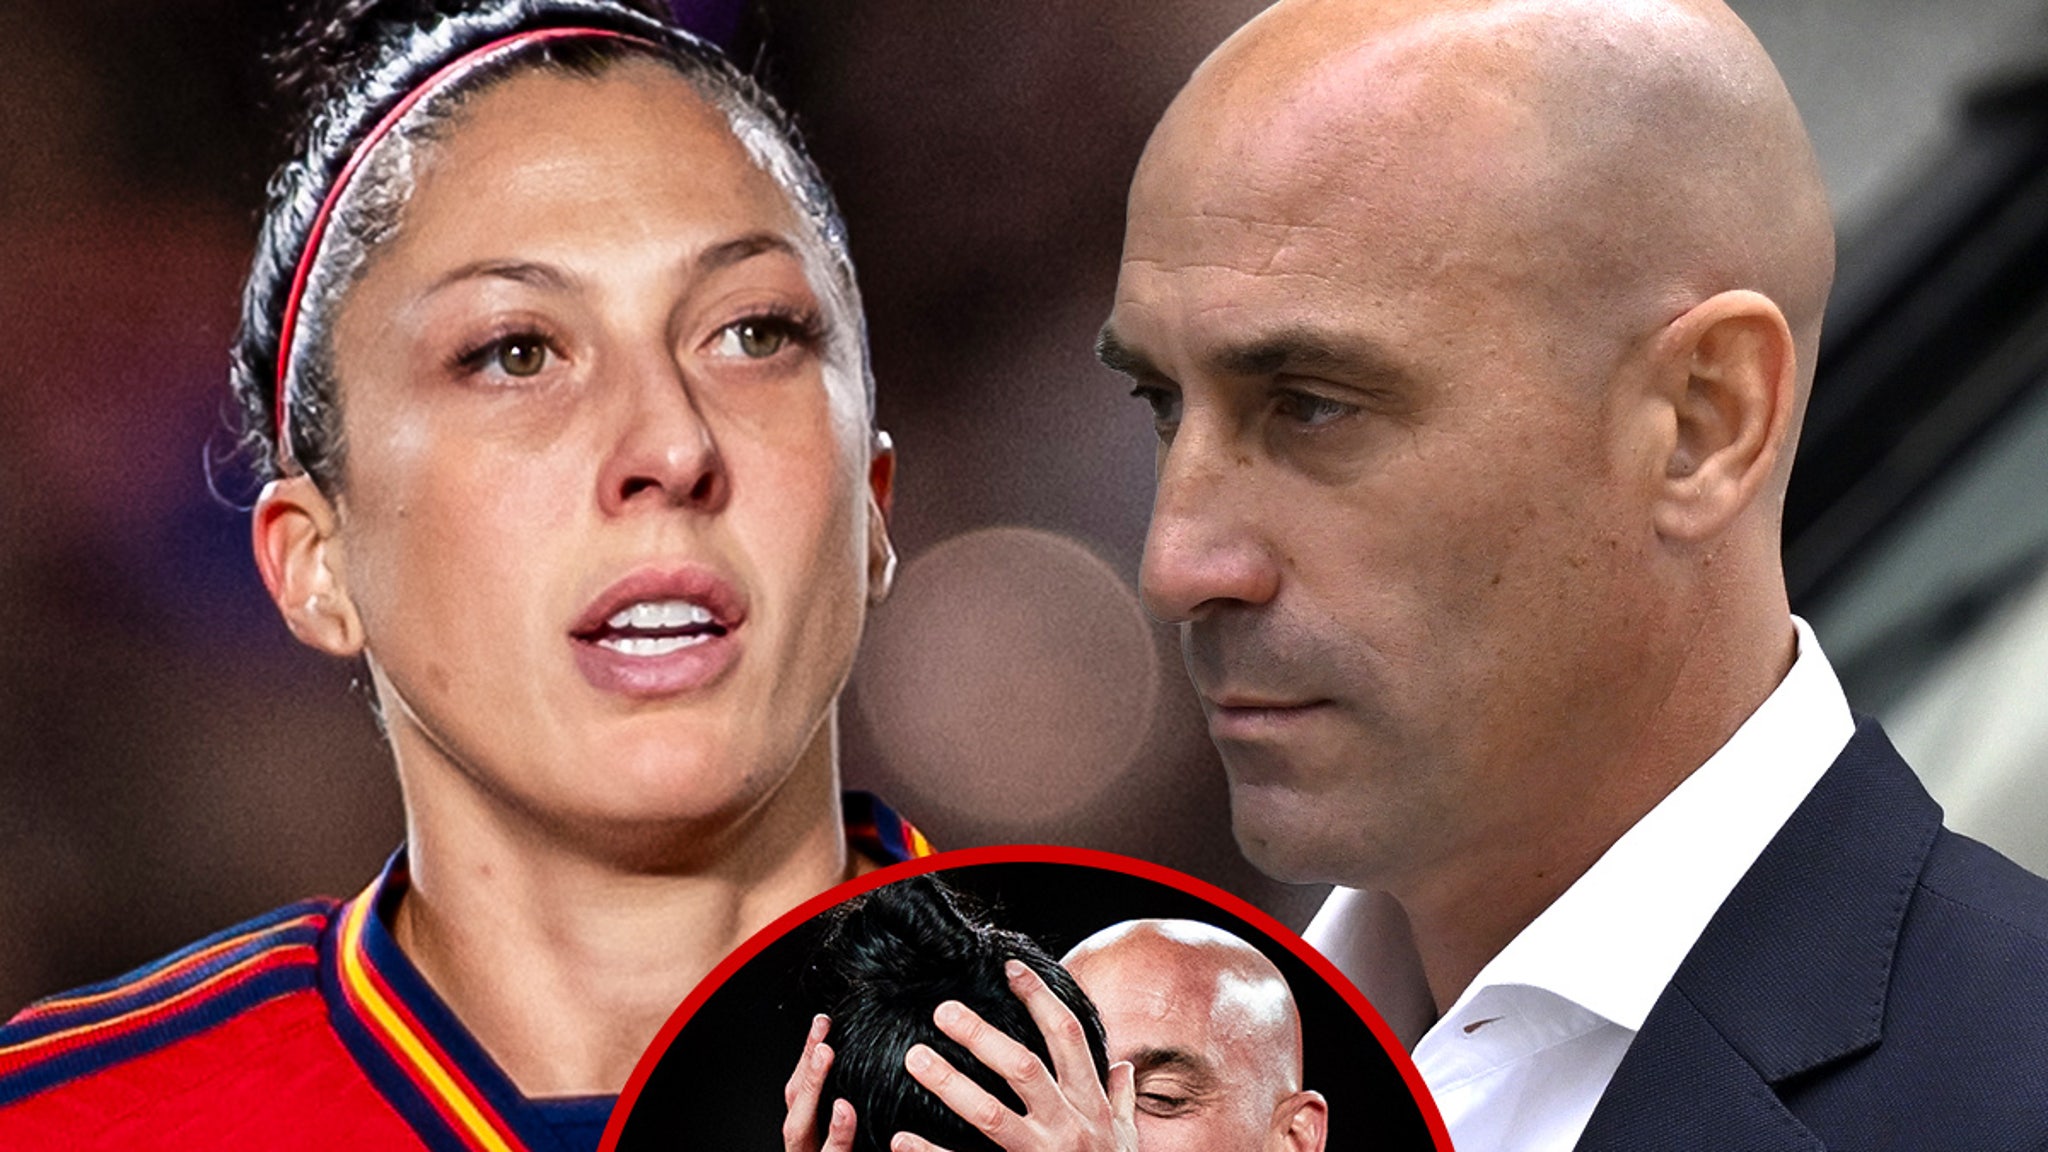 Jenni Hermoso Granted Restraining Order From Luis Rubiales Over World Cup Kiss